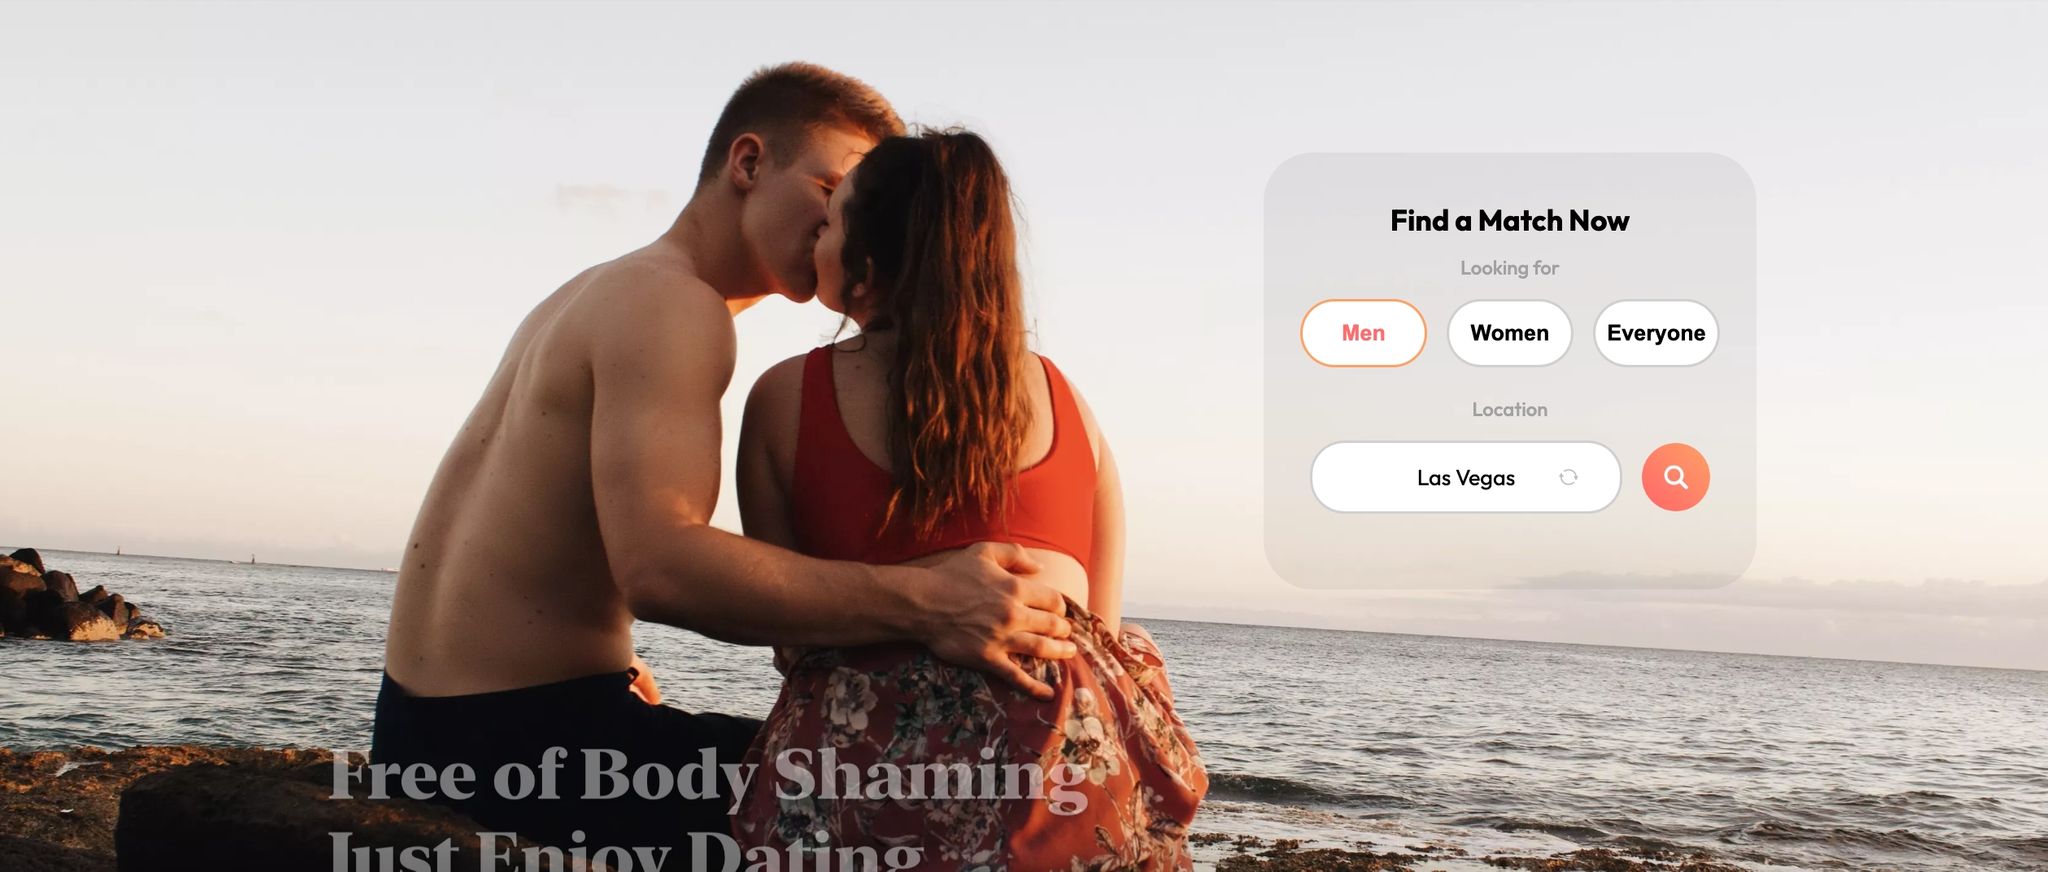 New Dating App ‘WooPlus’ Aims to be Tinder for Plus Size People